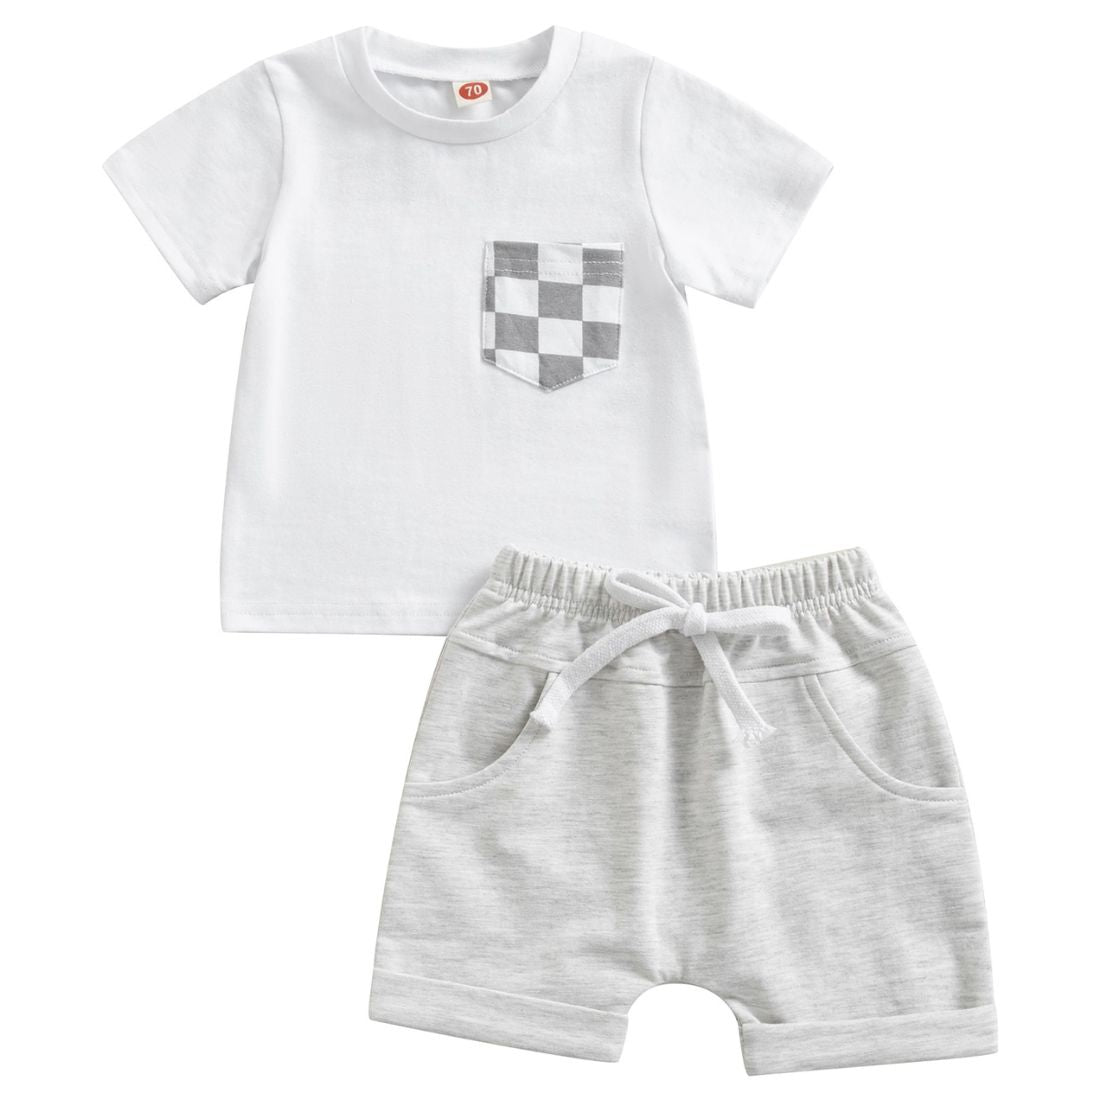 Buy Trendy and Afforable Baby and Toddler Clothing Sets @ My Trendy Youngsters - Dress your little man in Style @ My Trendy Youngsters 